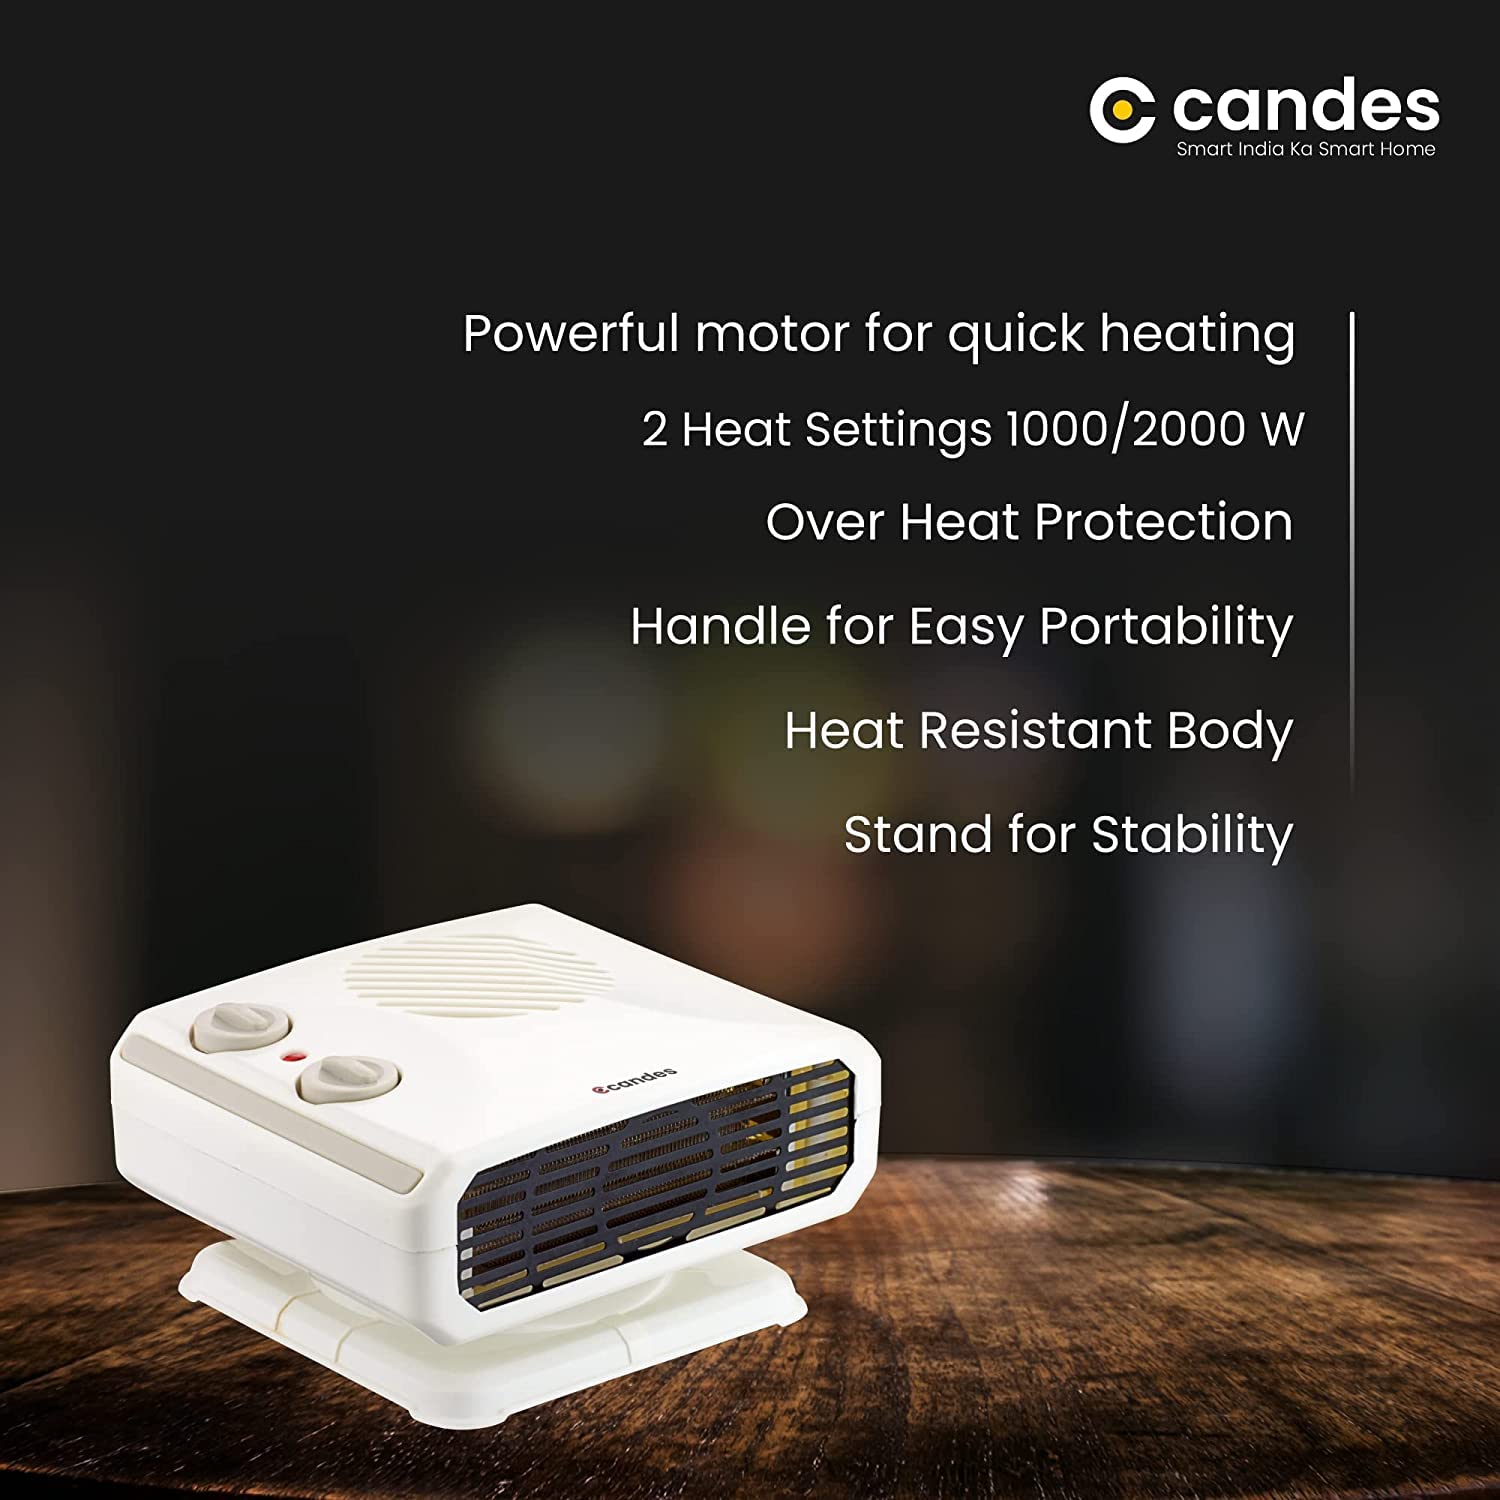 Candes Inova All in One Silent Blower Fan Room Heater Ideal for Small and Medium Areas, 2000 W (Ivory)